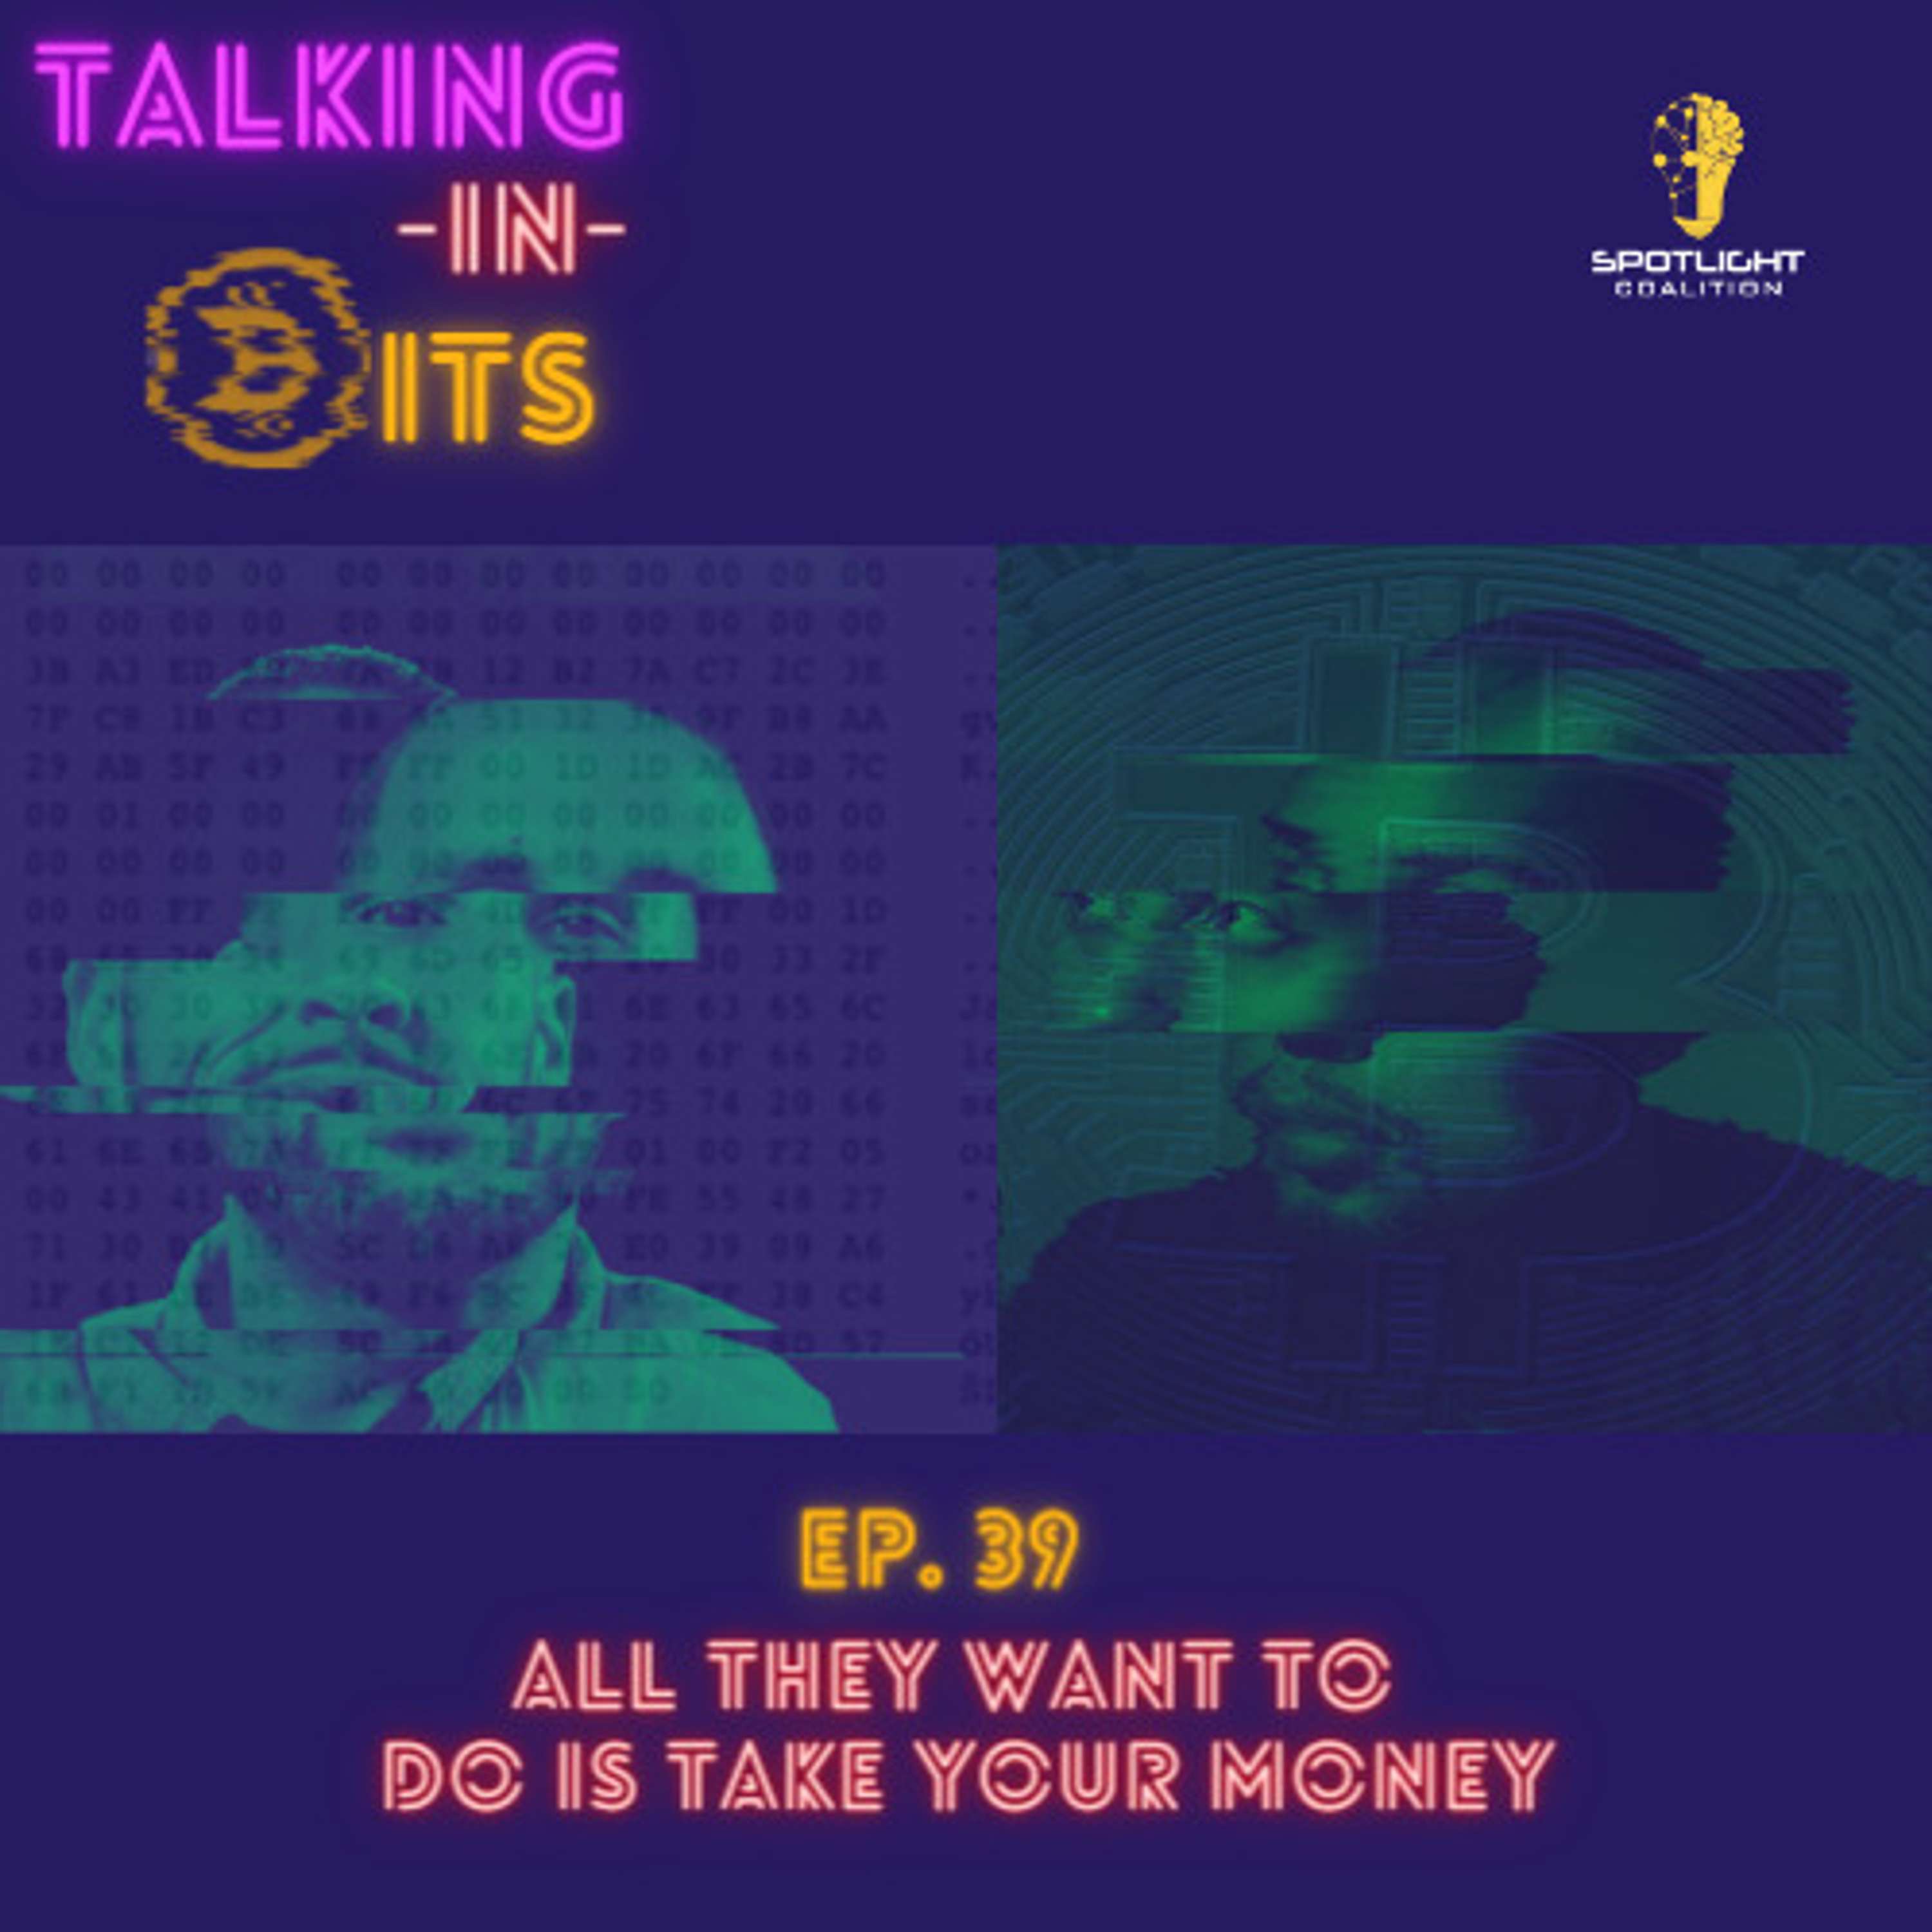 Talking in Bits: All They Want To Do Is Take Your Money